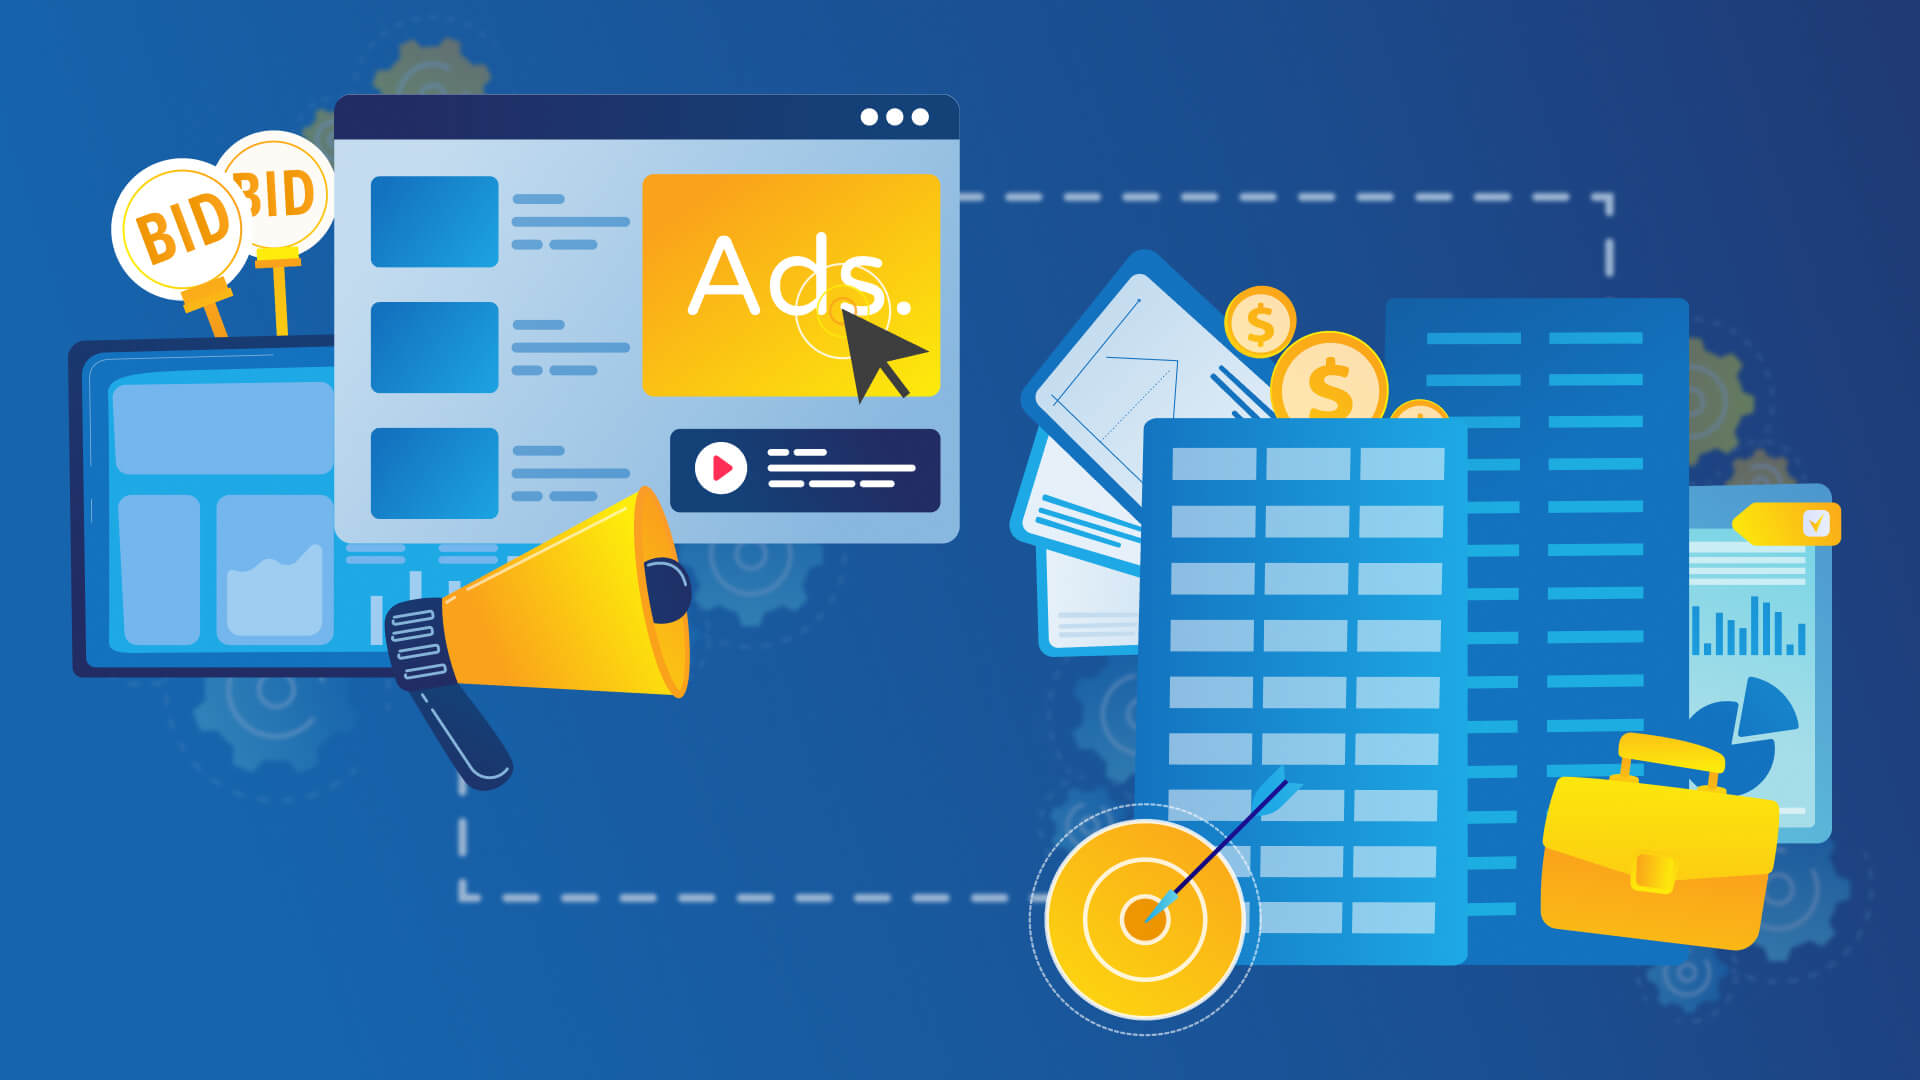 How can programmatic advertising be effective with ABM